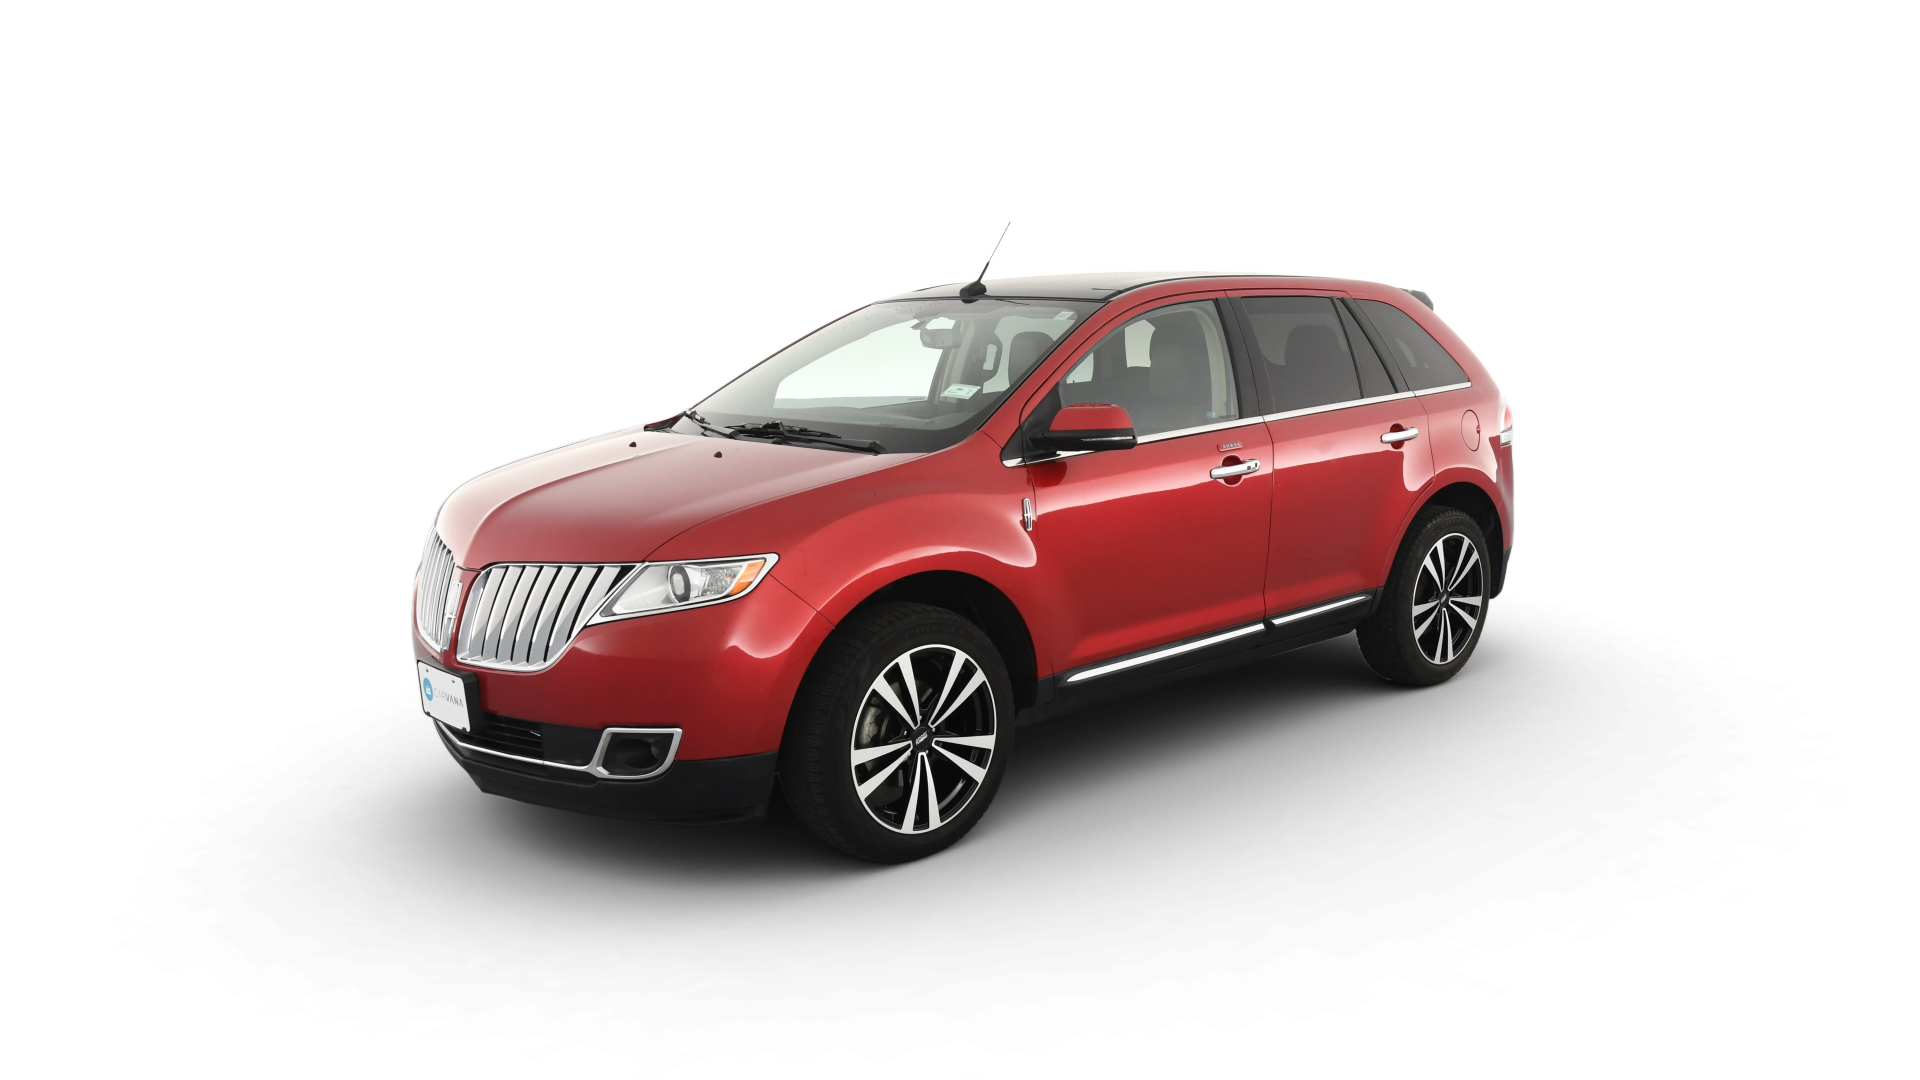 Used 2012 Lincoln MKX For Sale Online | Carvana